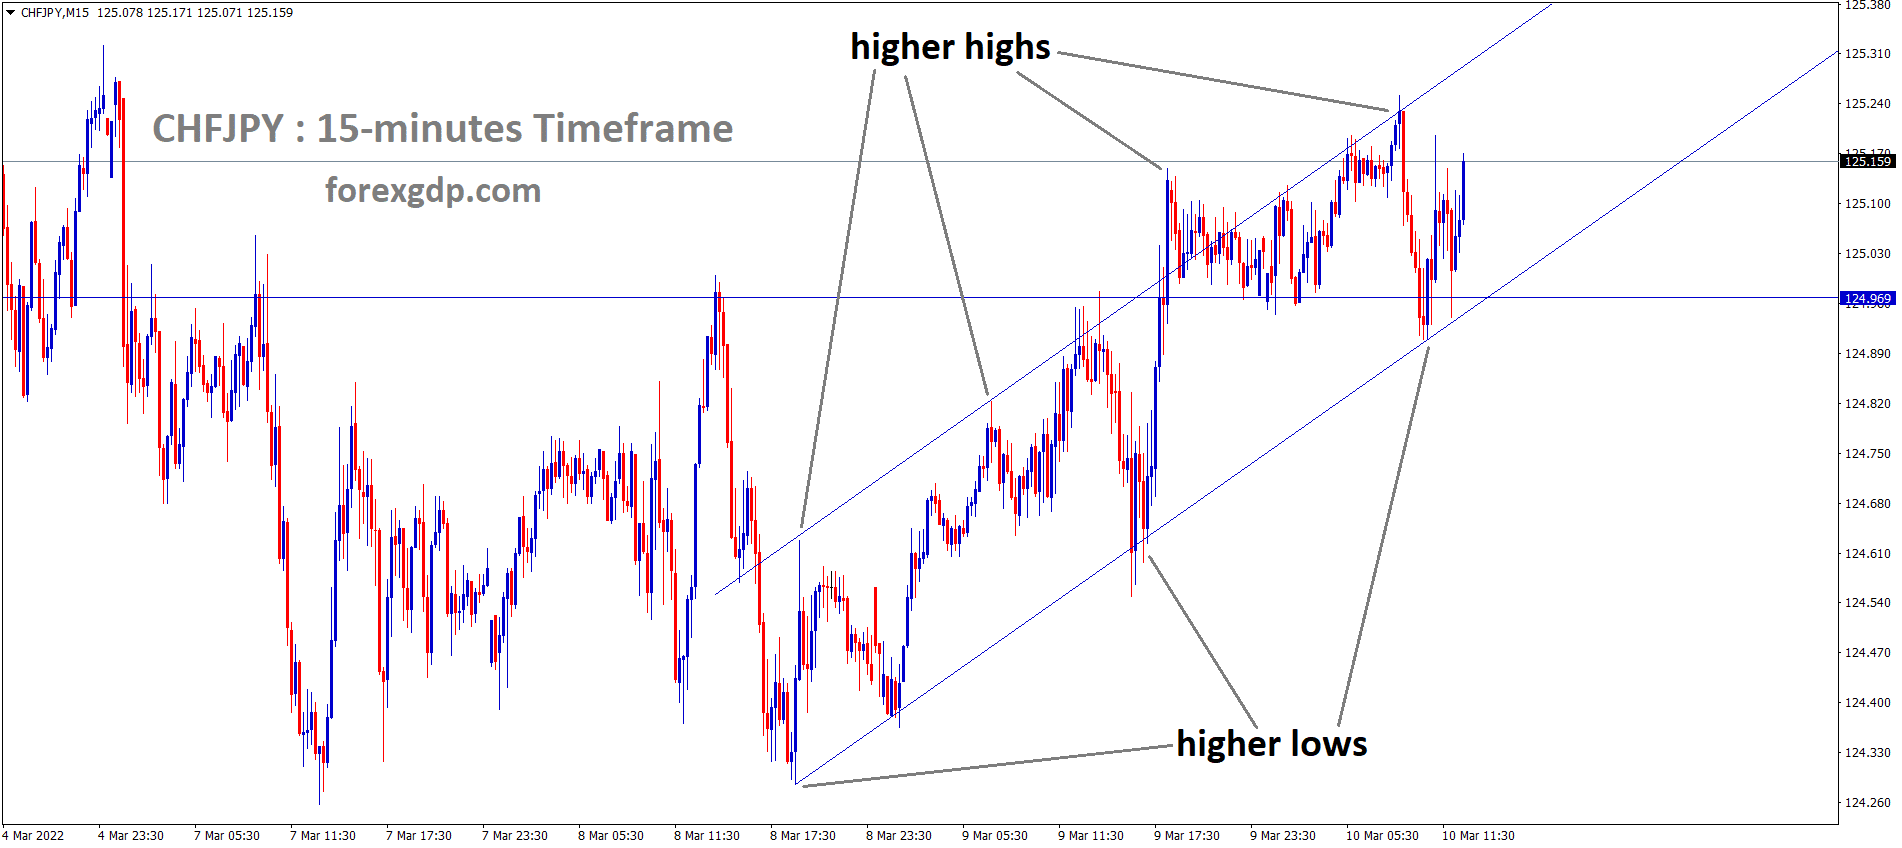 CHFJPY is moving in an Ascending channel and the market has rebounded from the higher low area of the Ascending channel